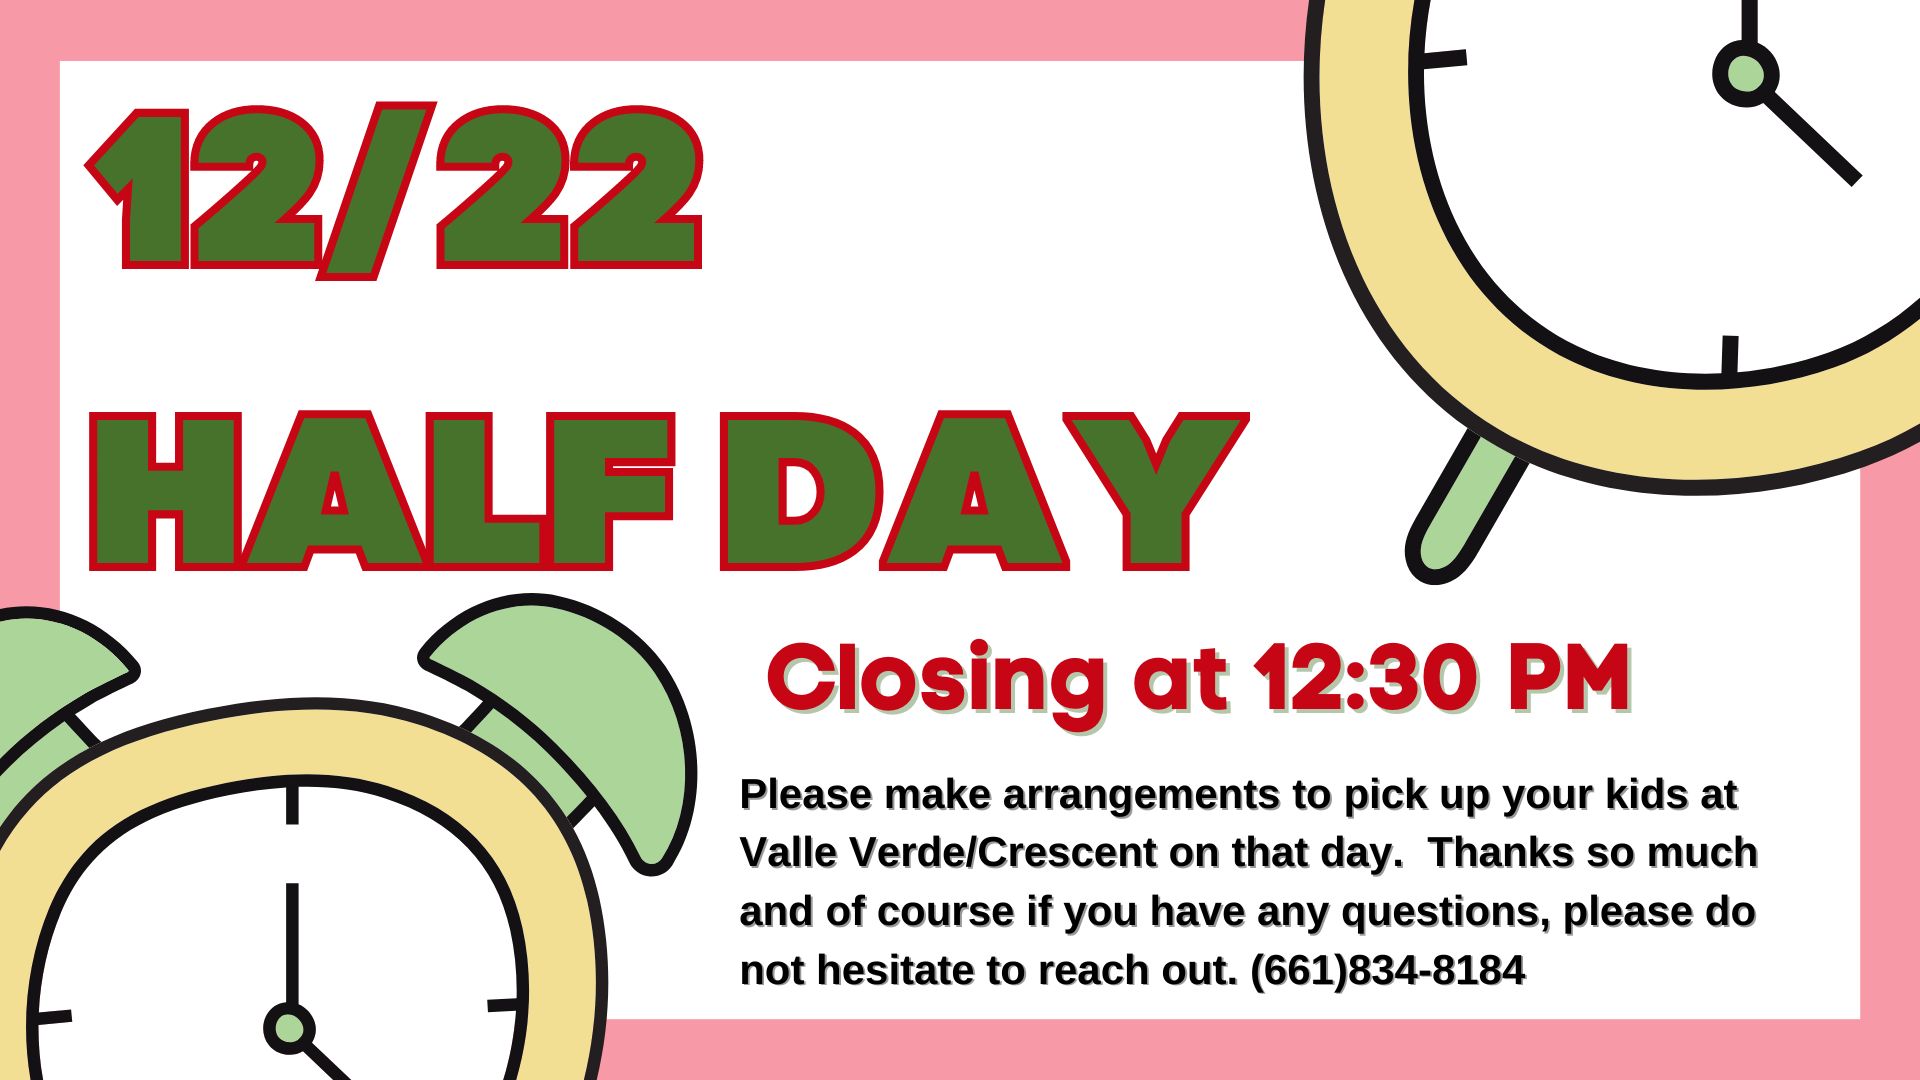 The image is an announcement for a half-day closure at 12:30 PM, requesting arrangements for kids' pickup with a contact number provided.